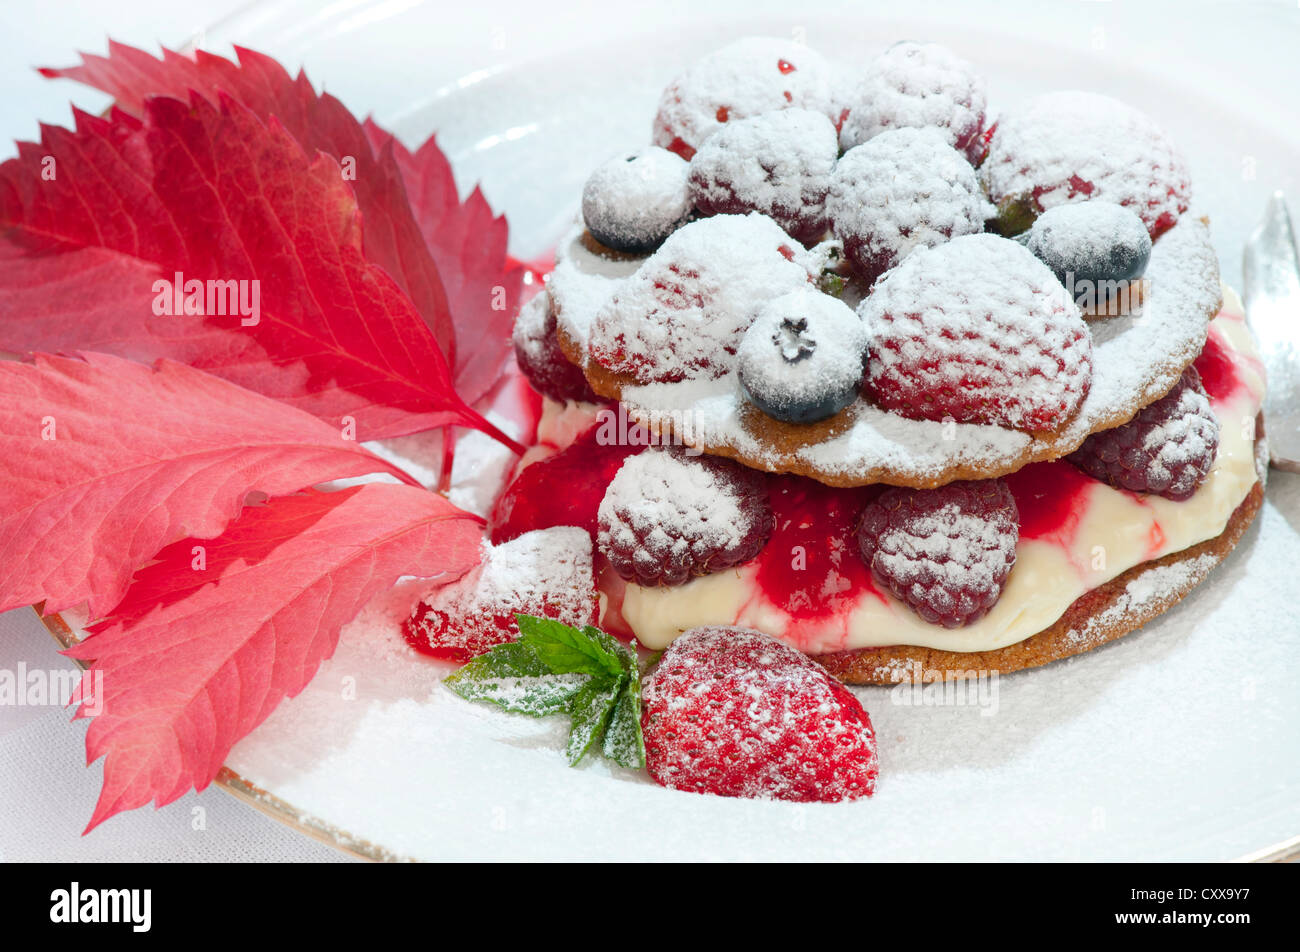 Freshly made strawberry and blueberry shortcake with confectioner's custard, cream and icing sugar frosting Stock Photo